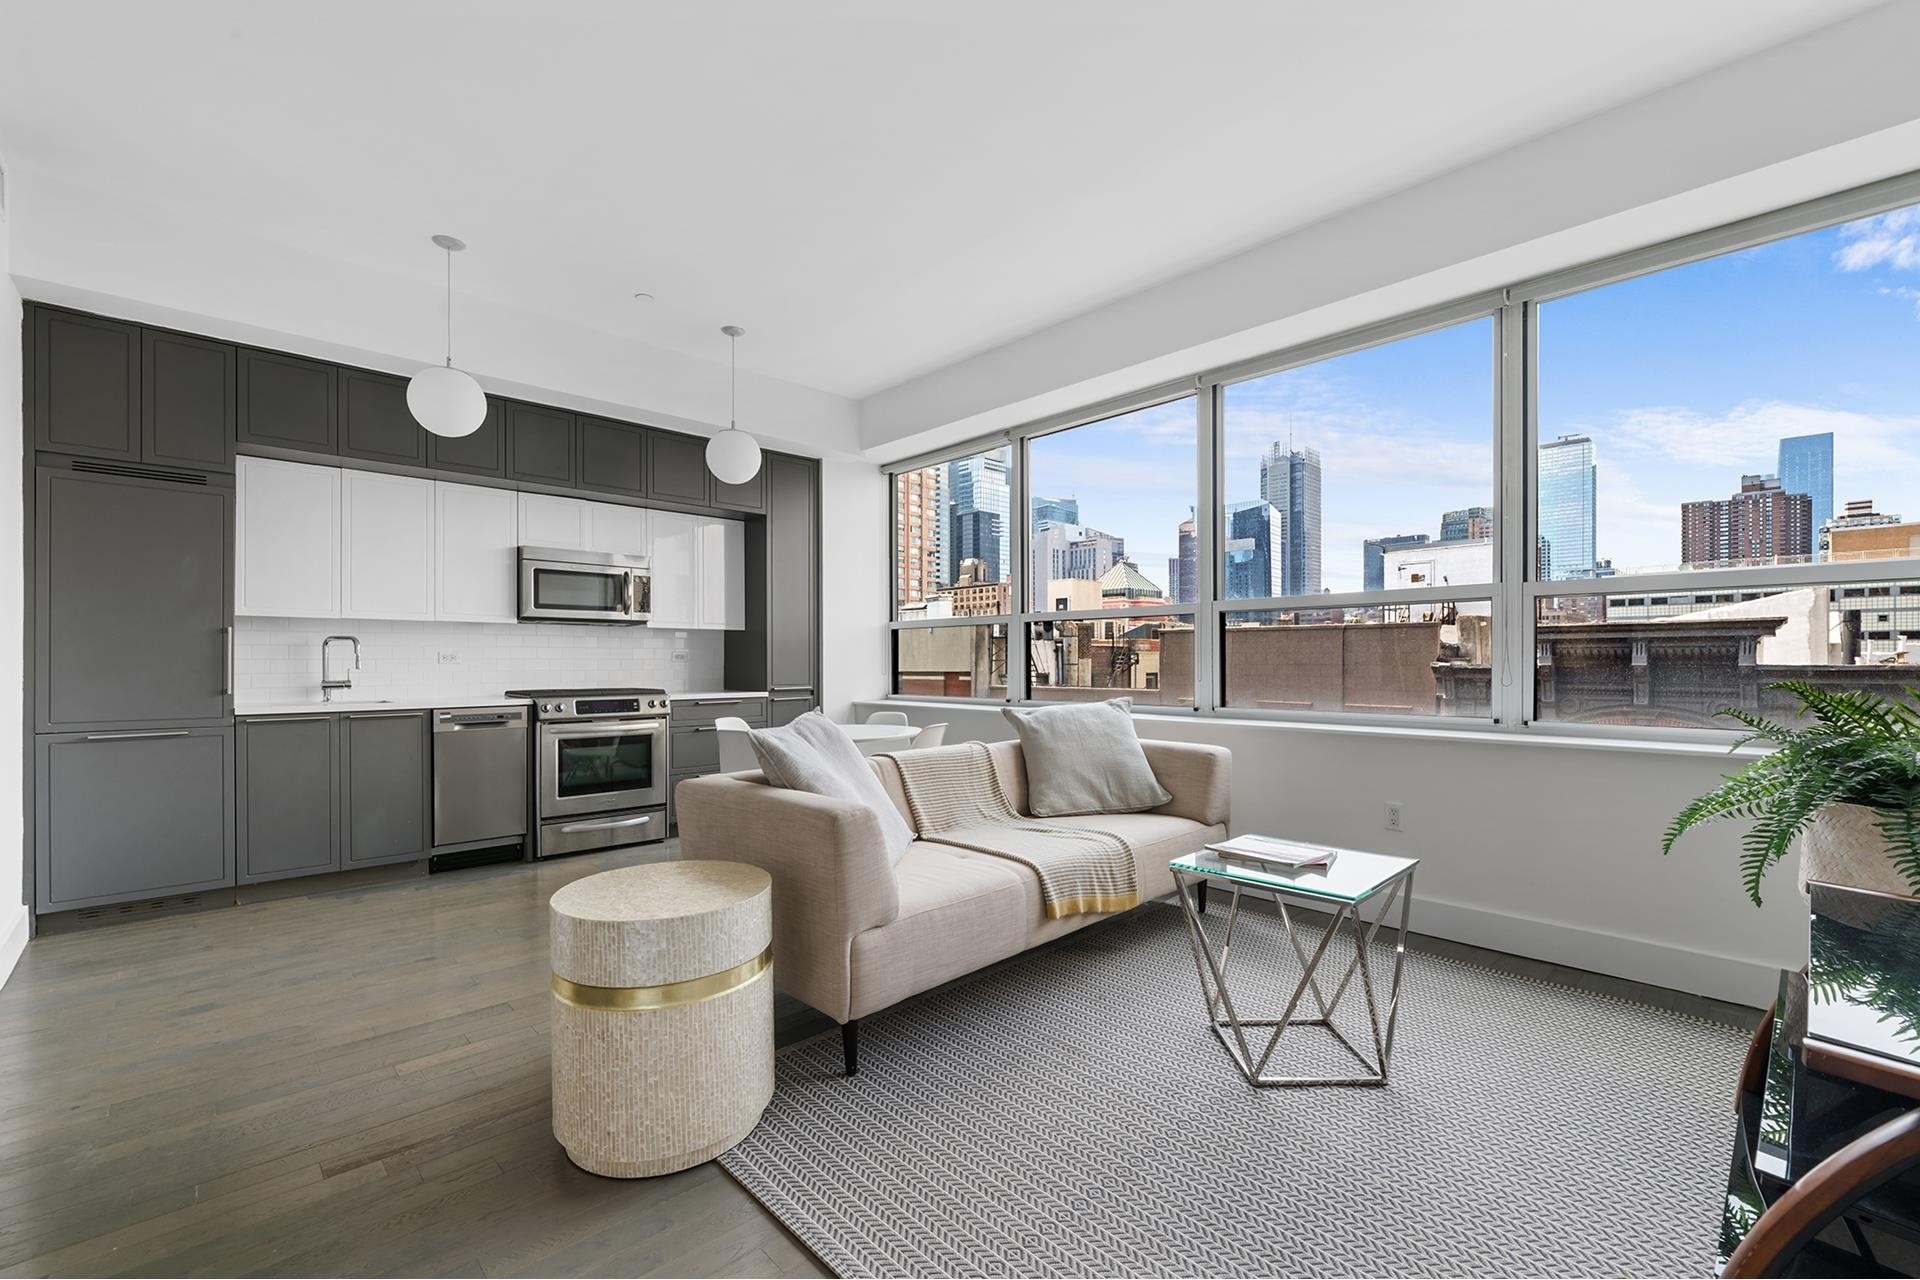 2. Condominiums for Sale at Nine52, 416 W 52ND ST, 617 Hell's Kitchen, New York, New York 10019